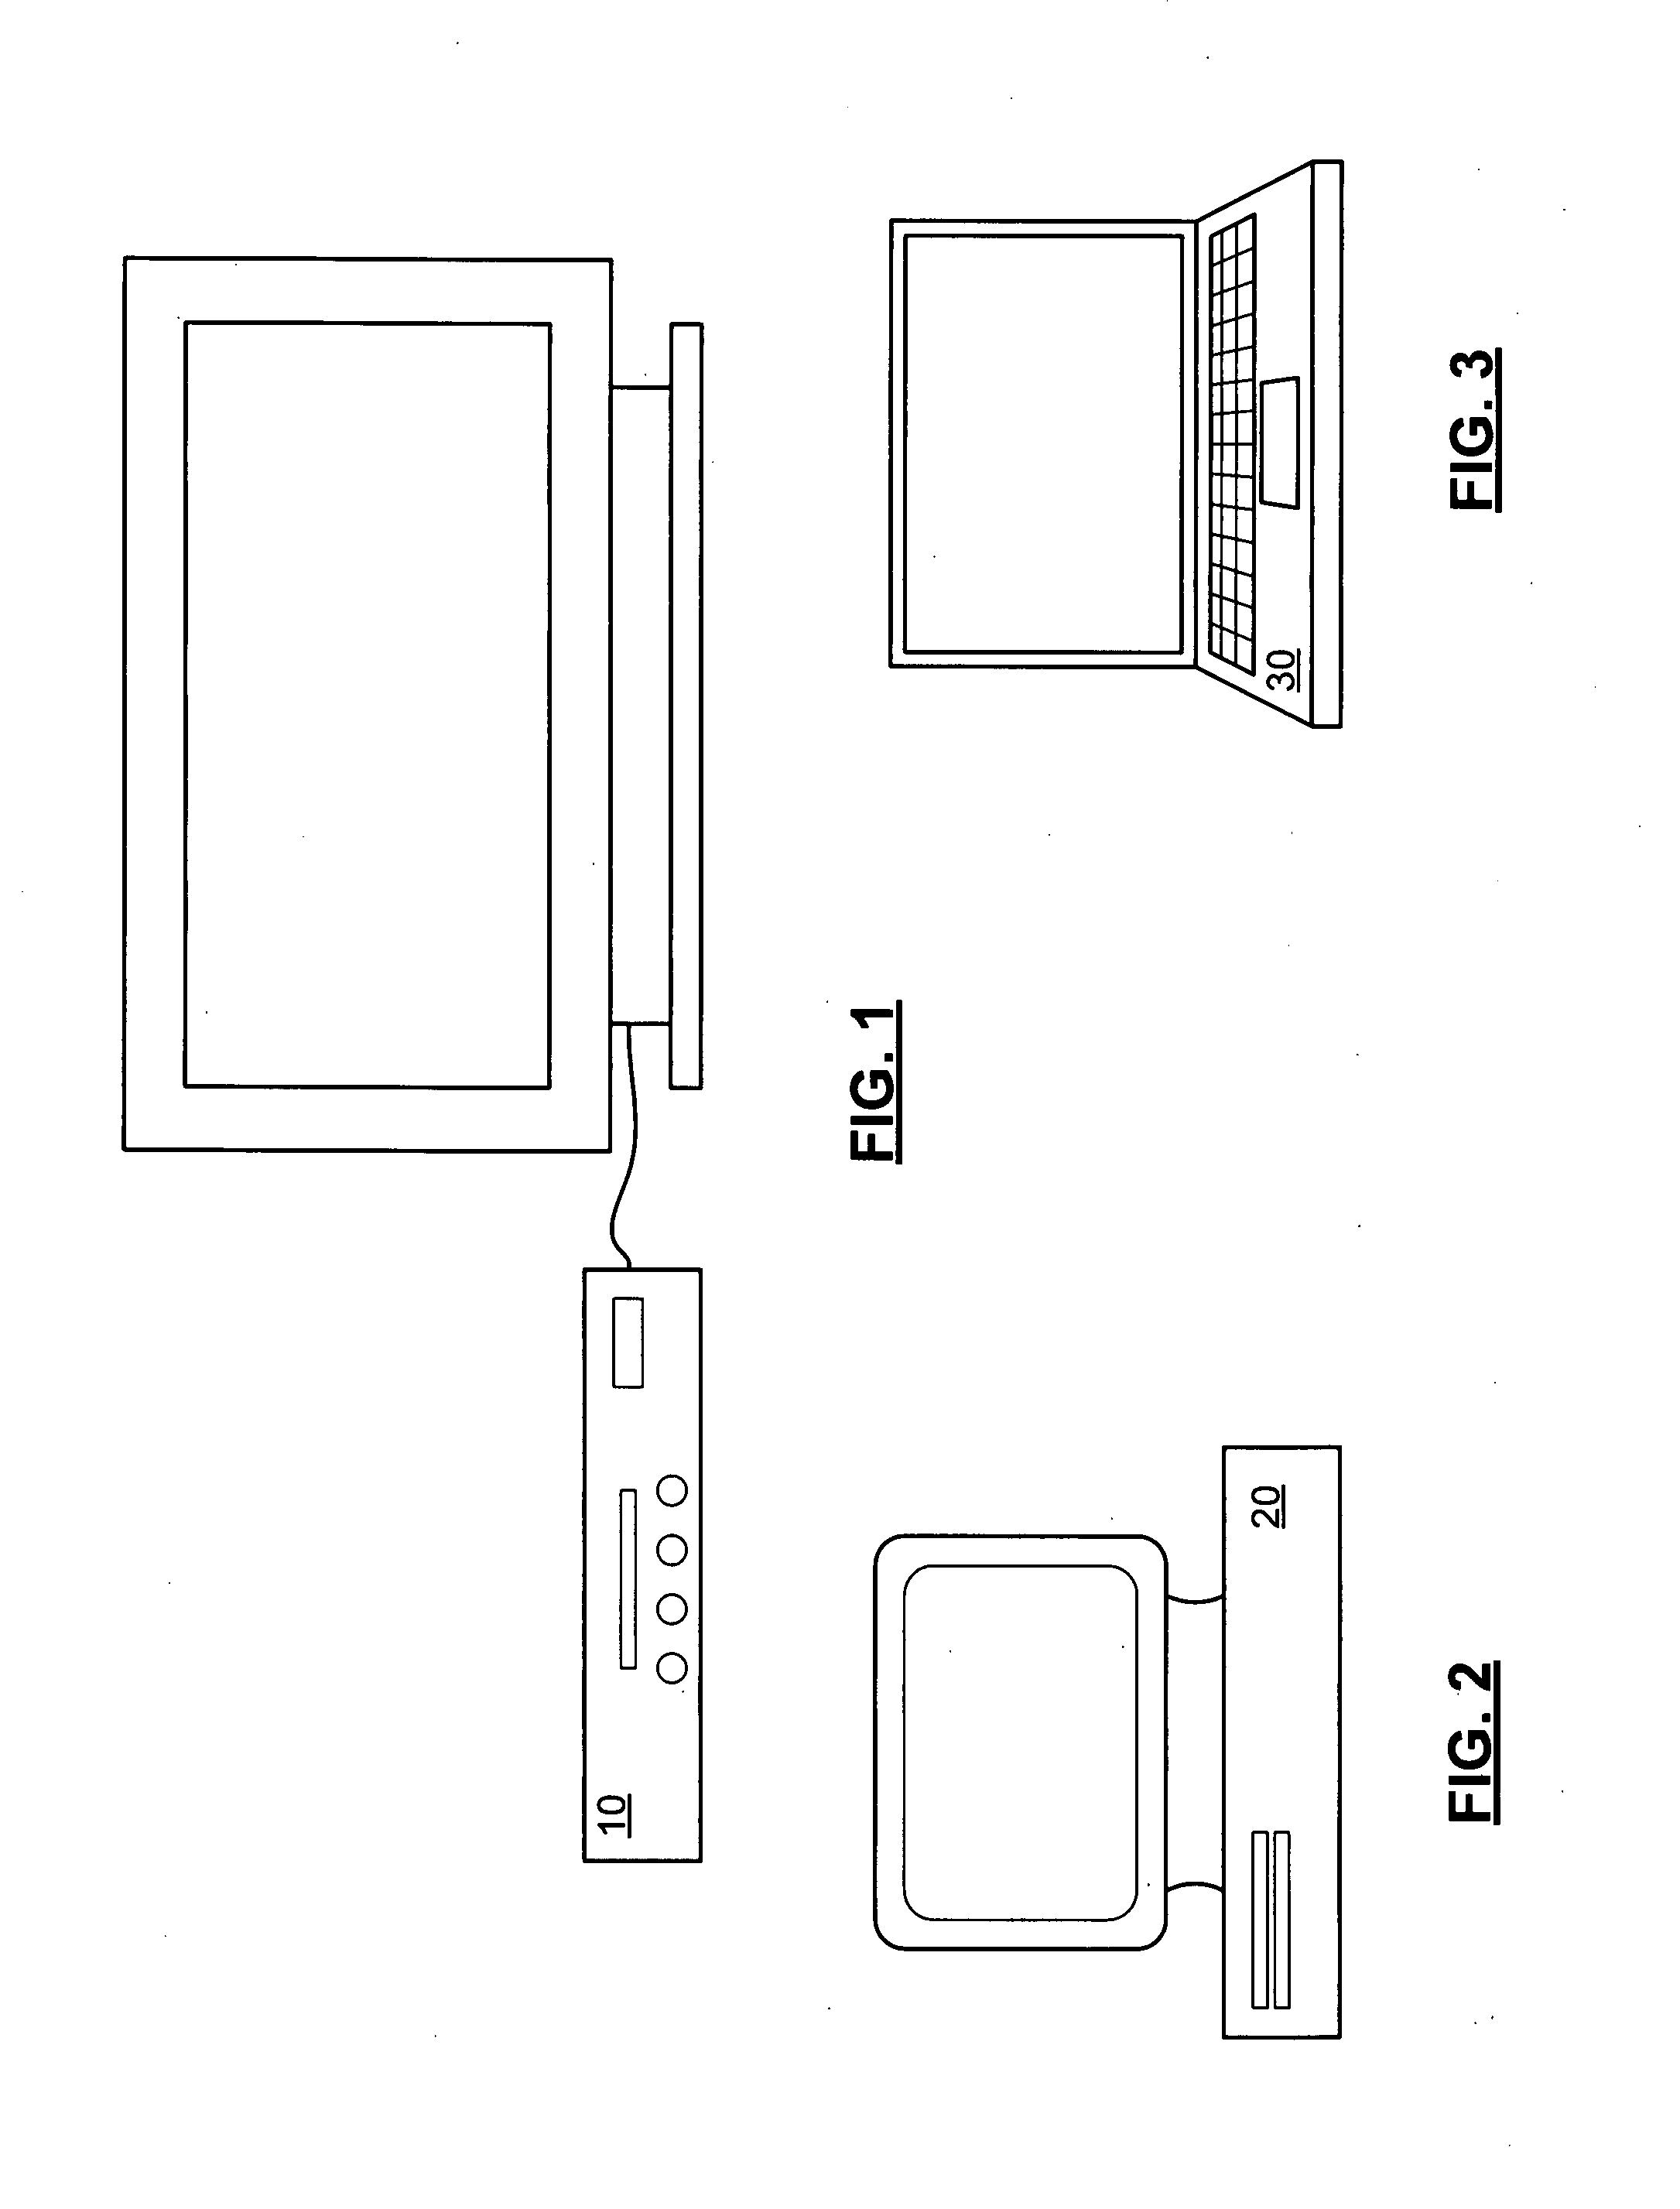 Motion refinement engine for use in video encoding in accordance with a plurality of sub-pixel resolutions and methods for use therewith